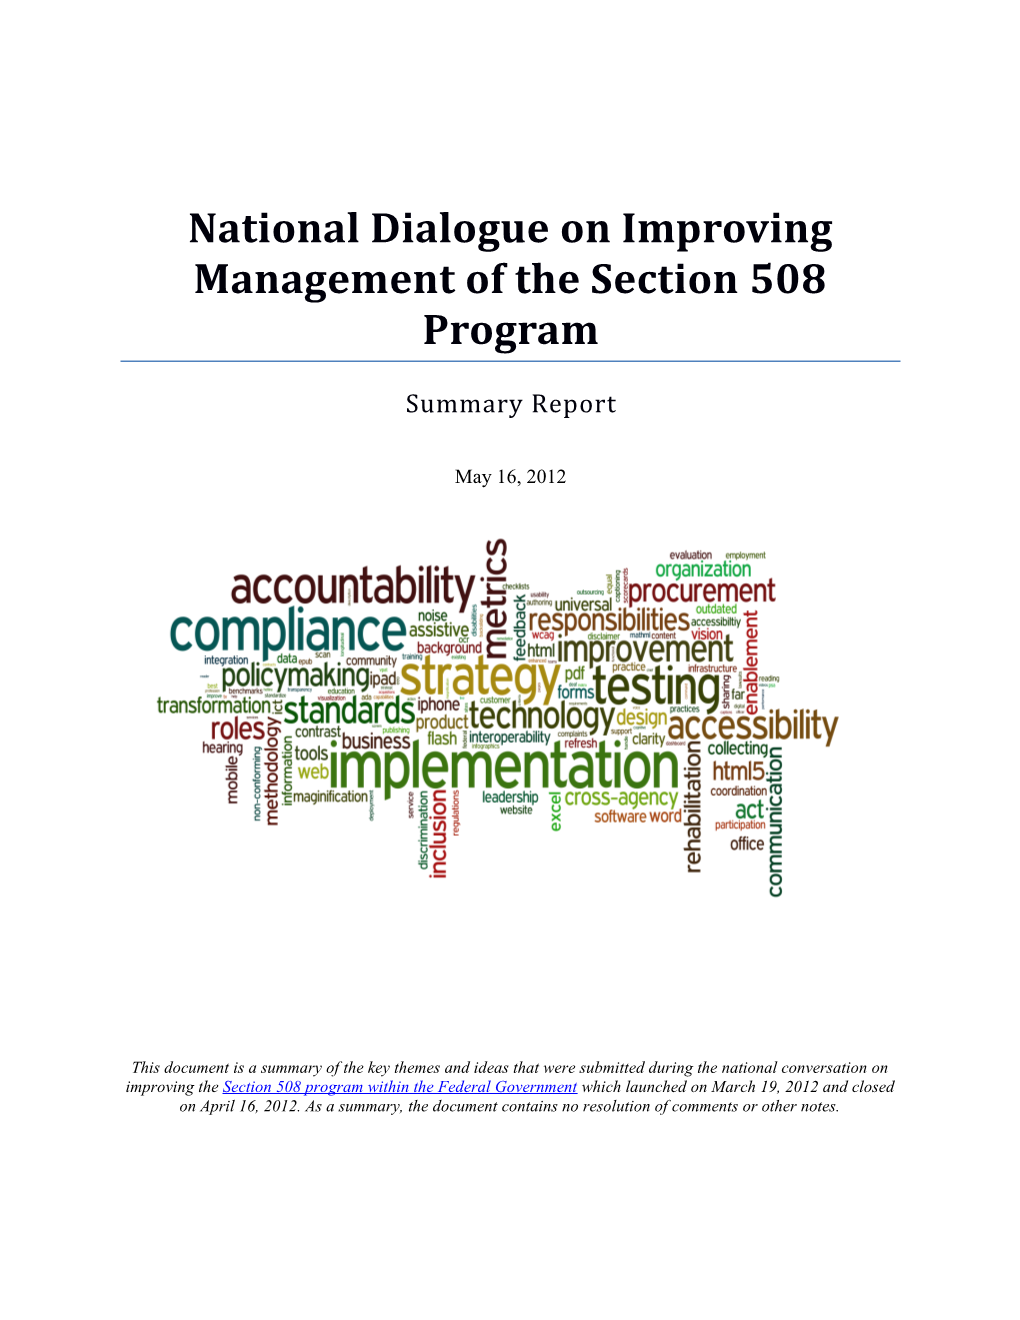 National Dialogue on Improving Management of the Section 508 Program